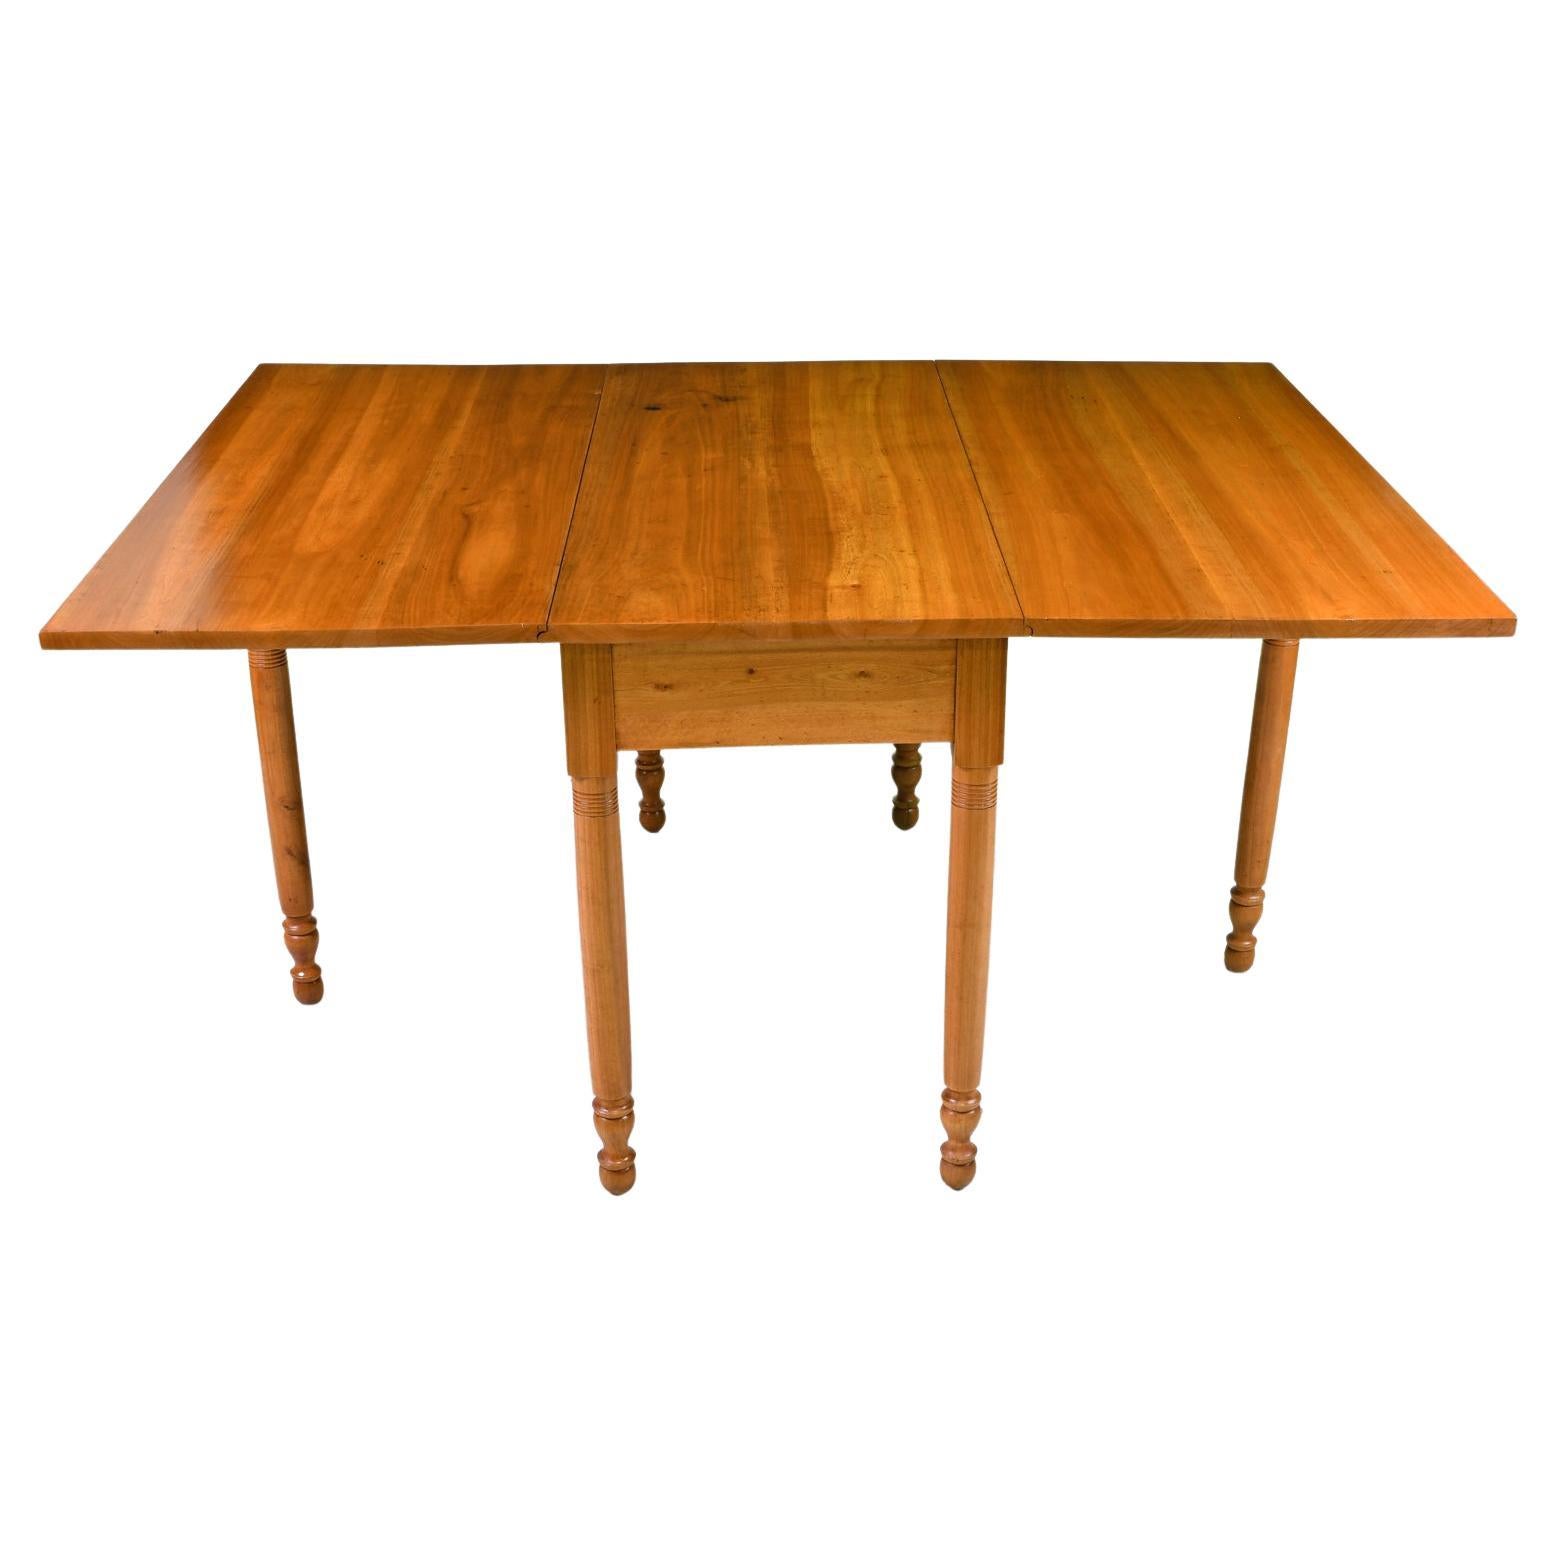 Hand-Crafted Pennsylvania Gate-Leg Drop-Leaf Sheraton Dining Table in Cherry Wood, circa 1830 For Sale